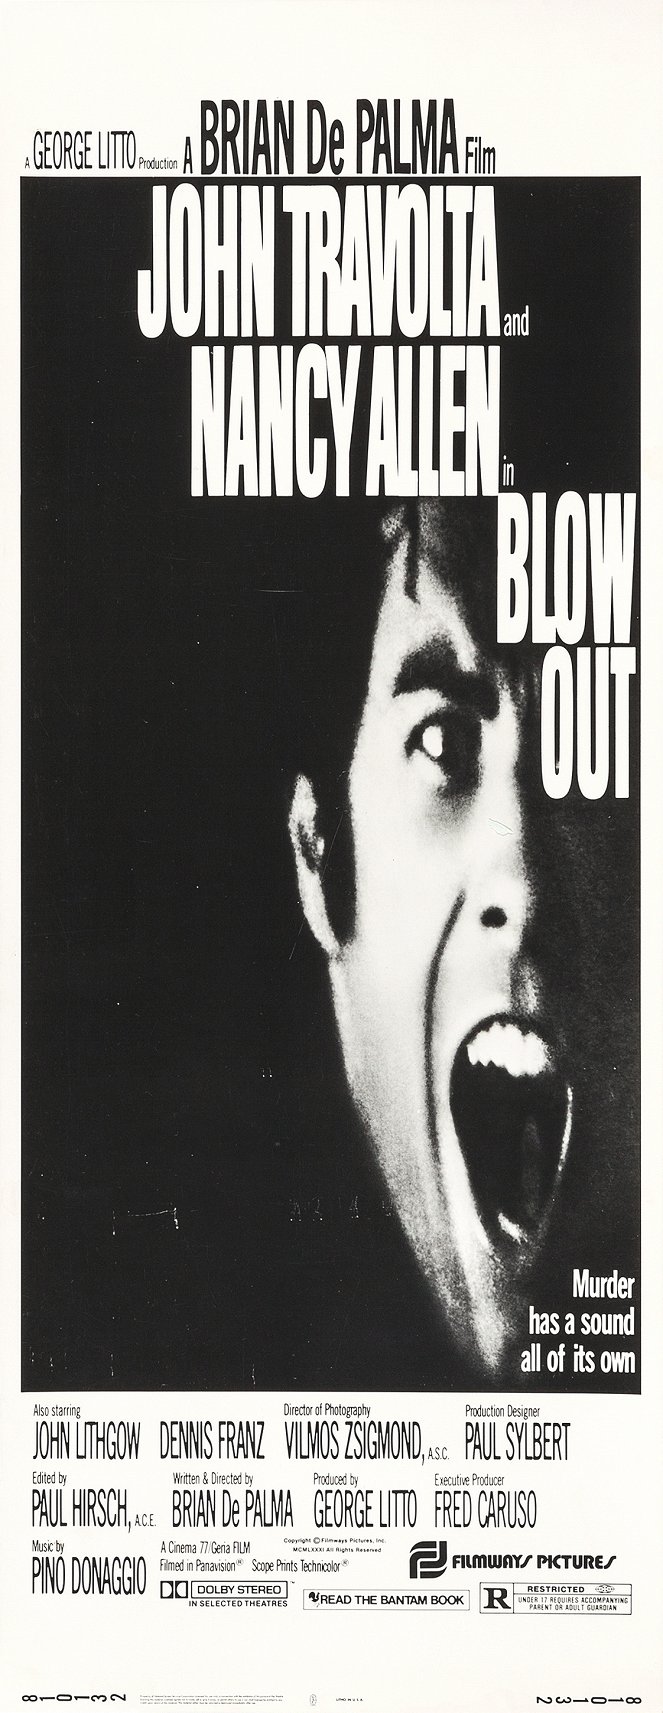 Blow Out - Posters